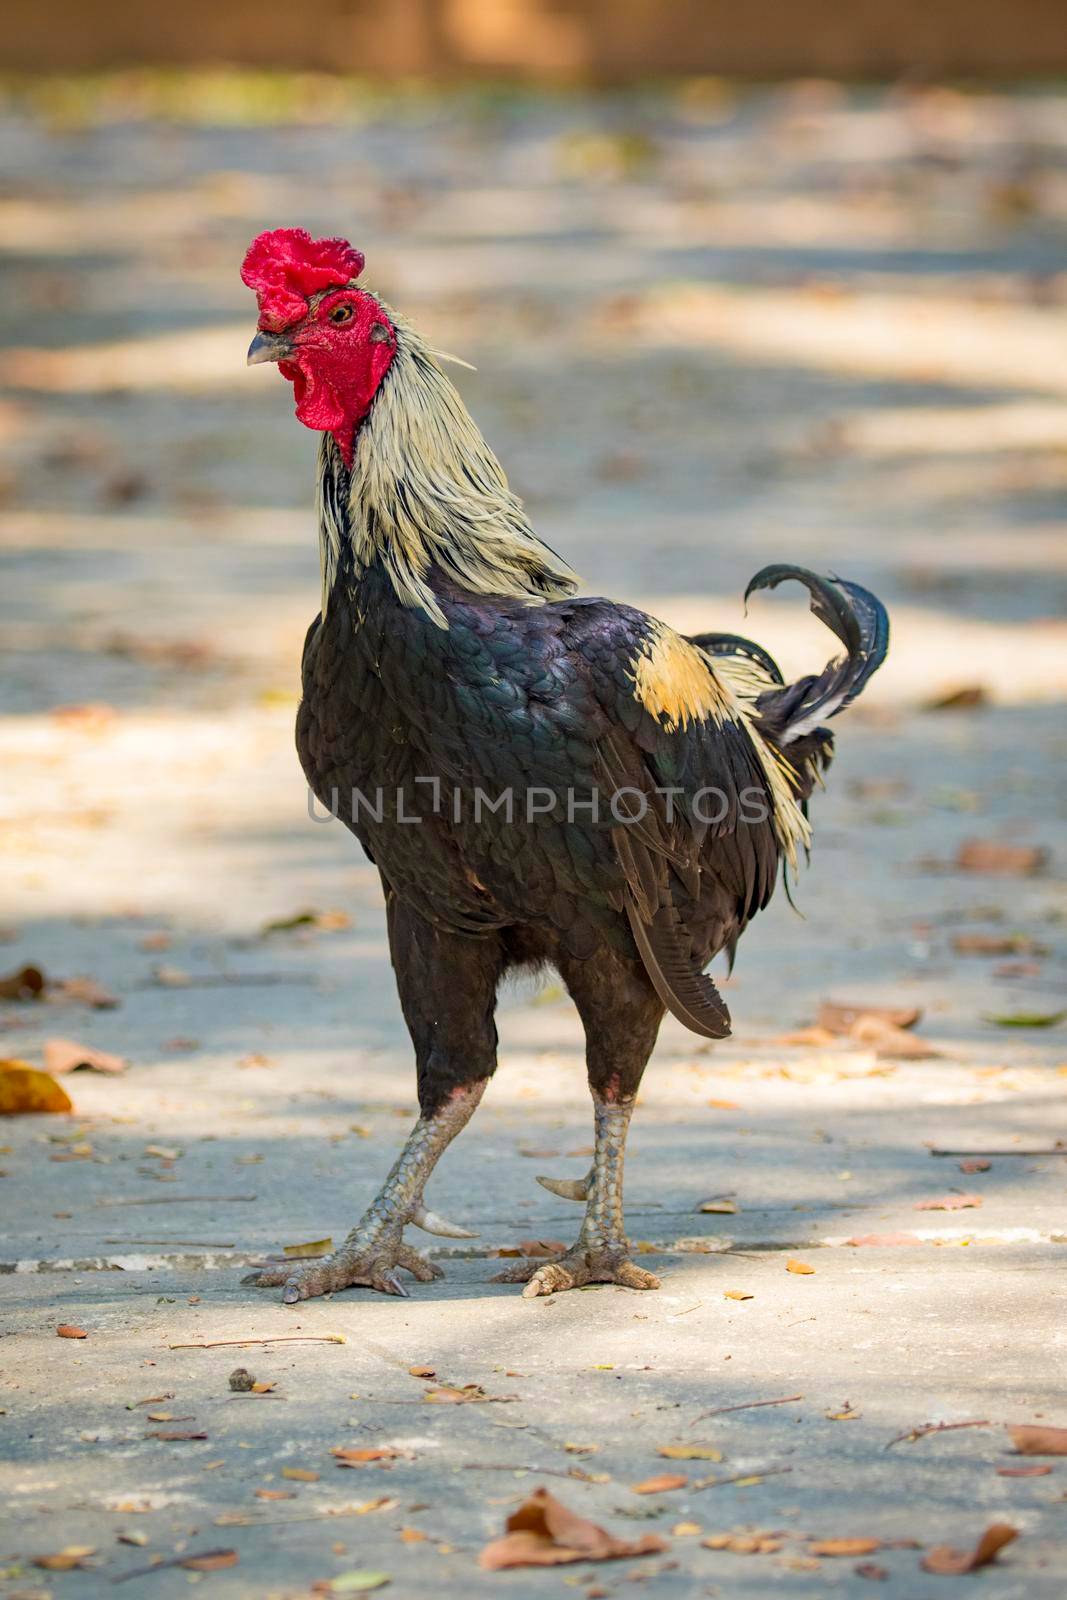 Image of a rooster on nature background. Farm Animals.